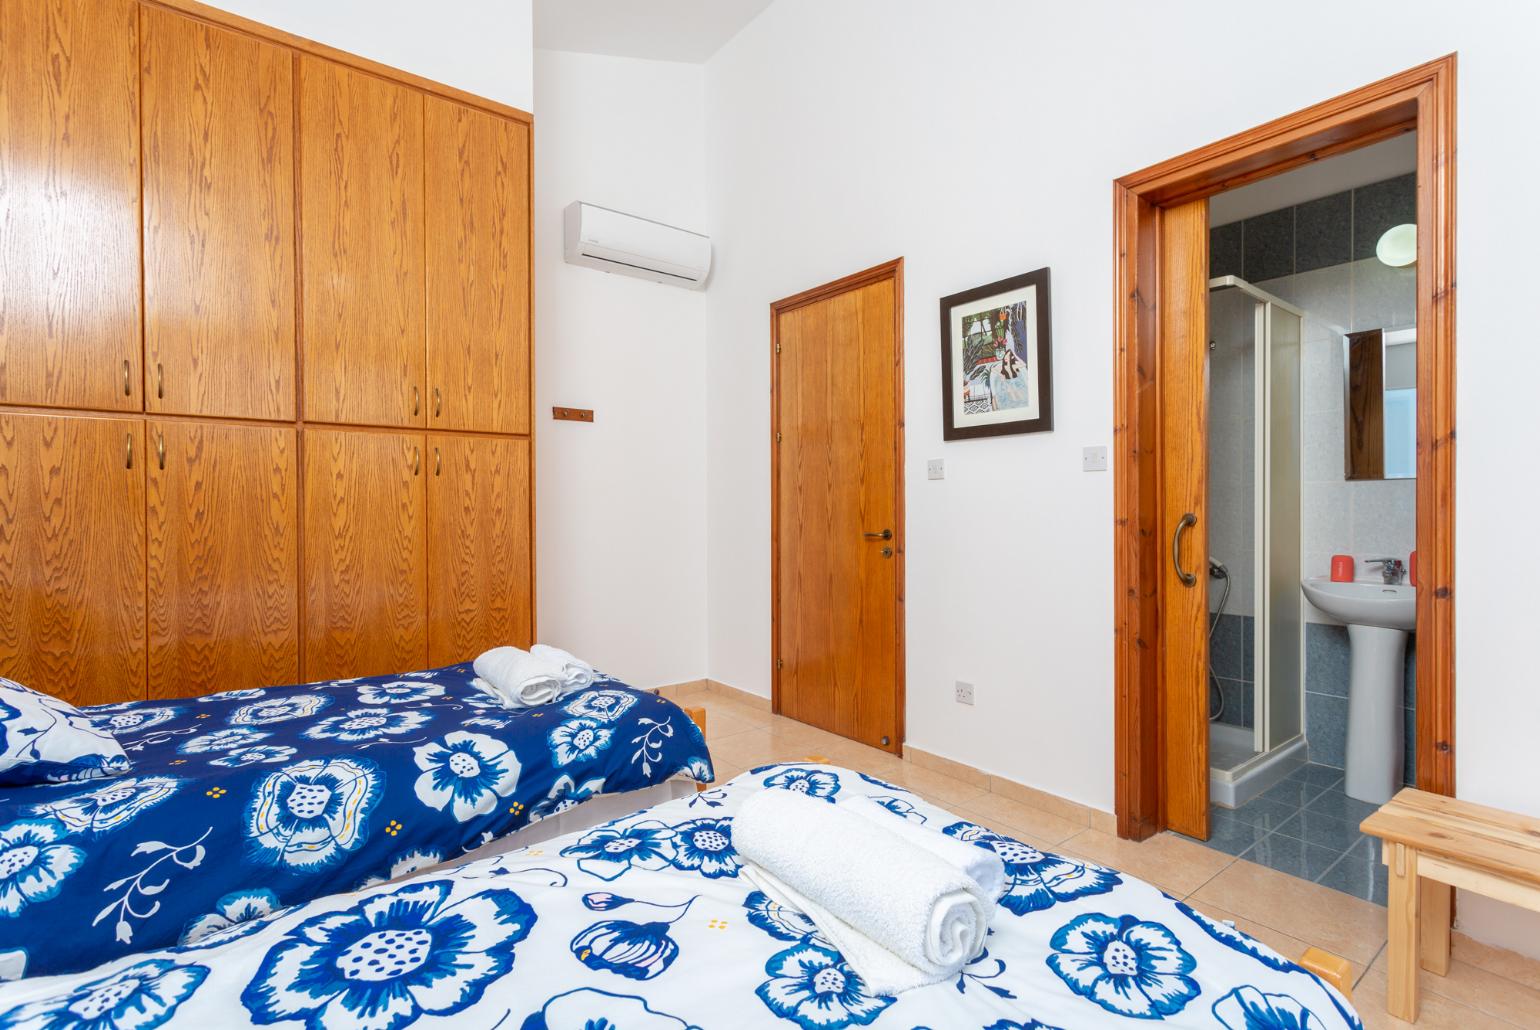 Twin bedroom with en suite bathroom, A/C, and balcony access with sea views